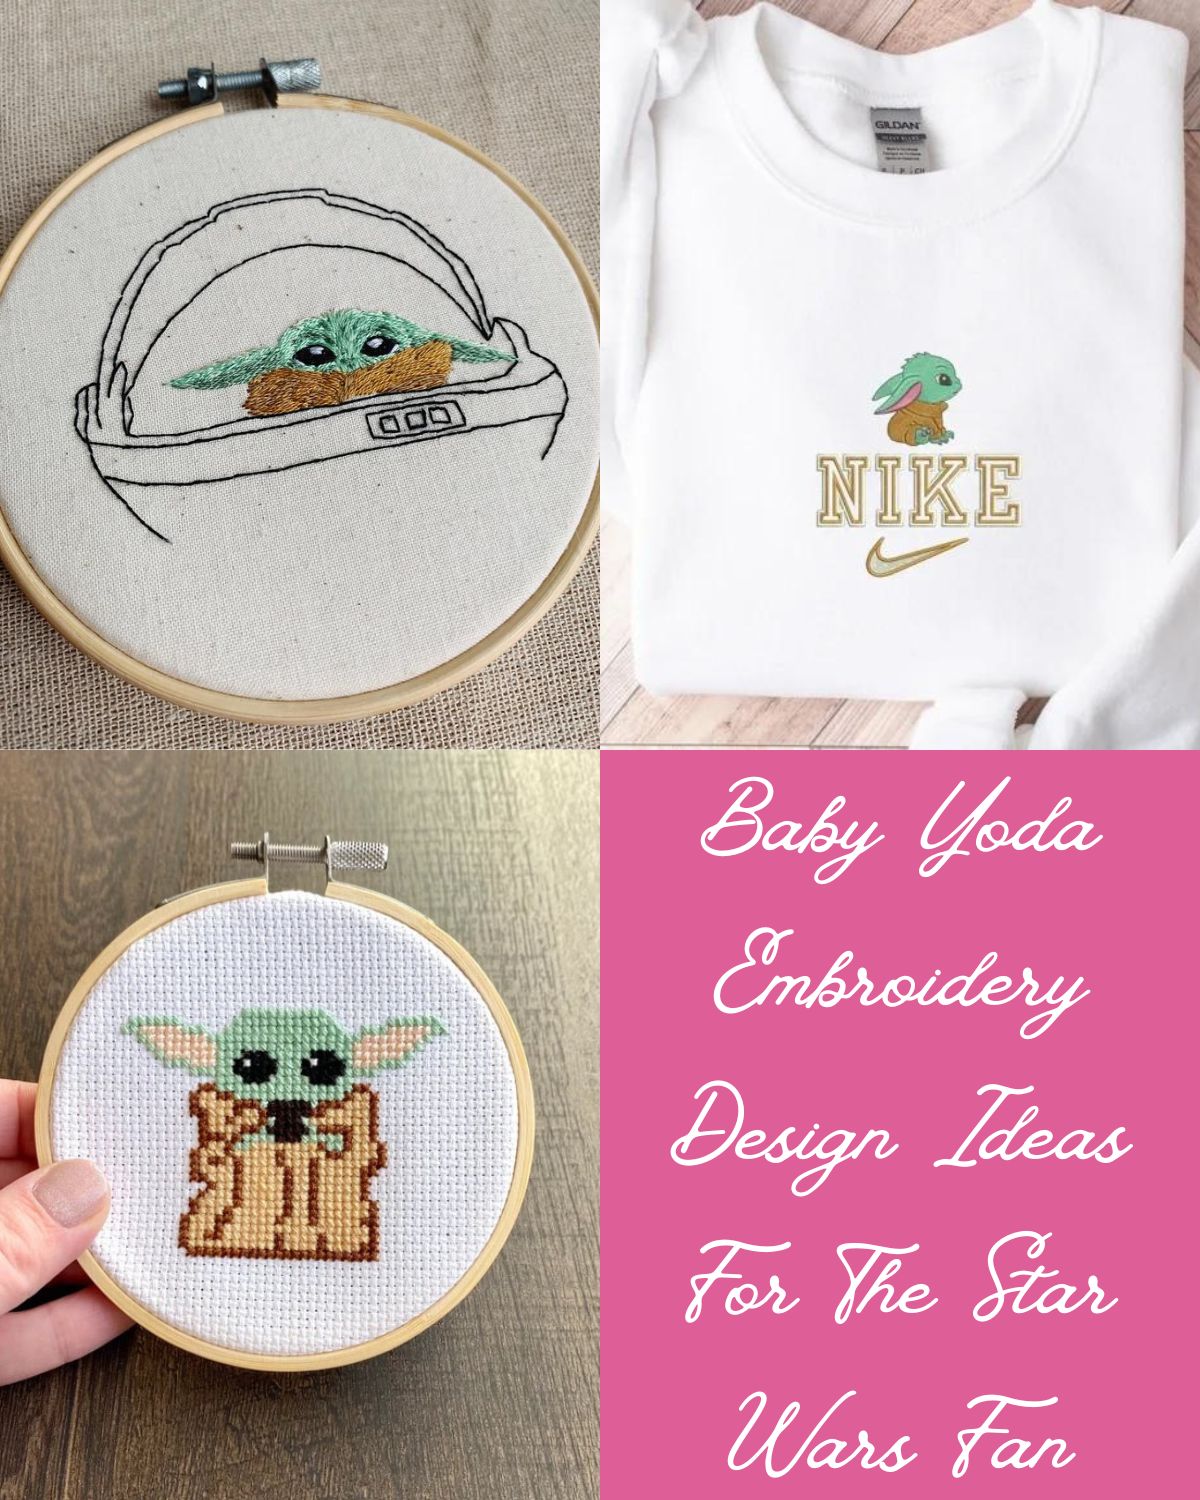 Three different embroidery projects that show Baby Yoda 